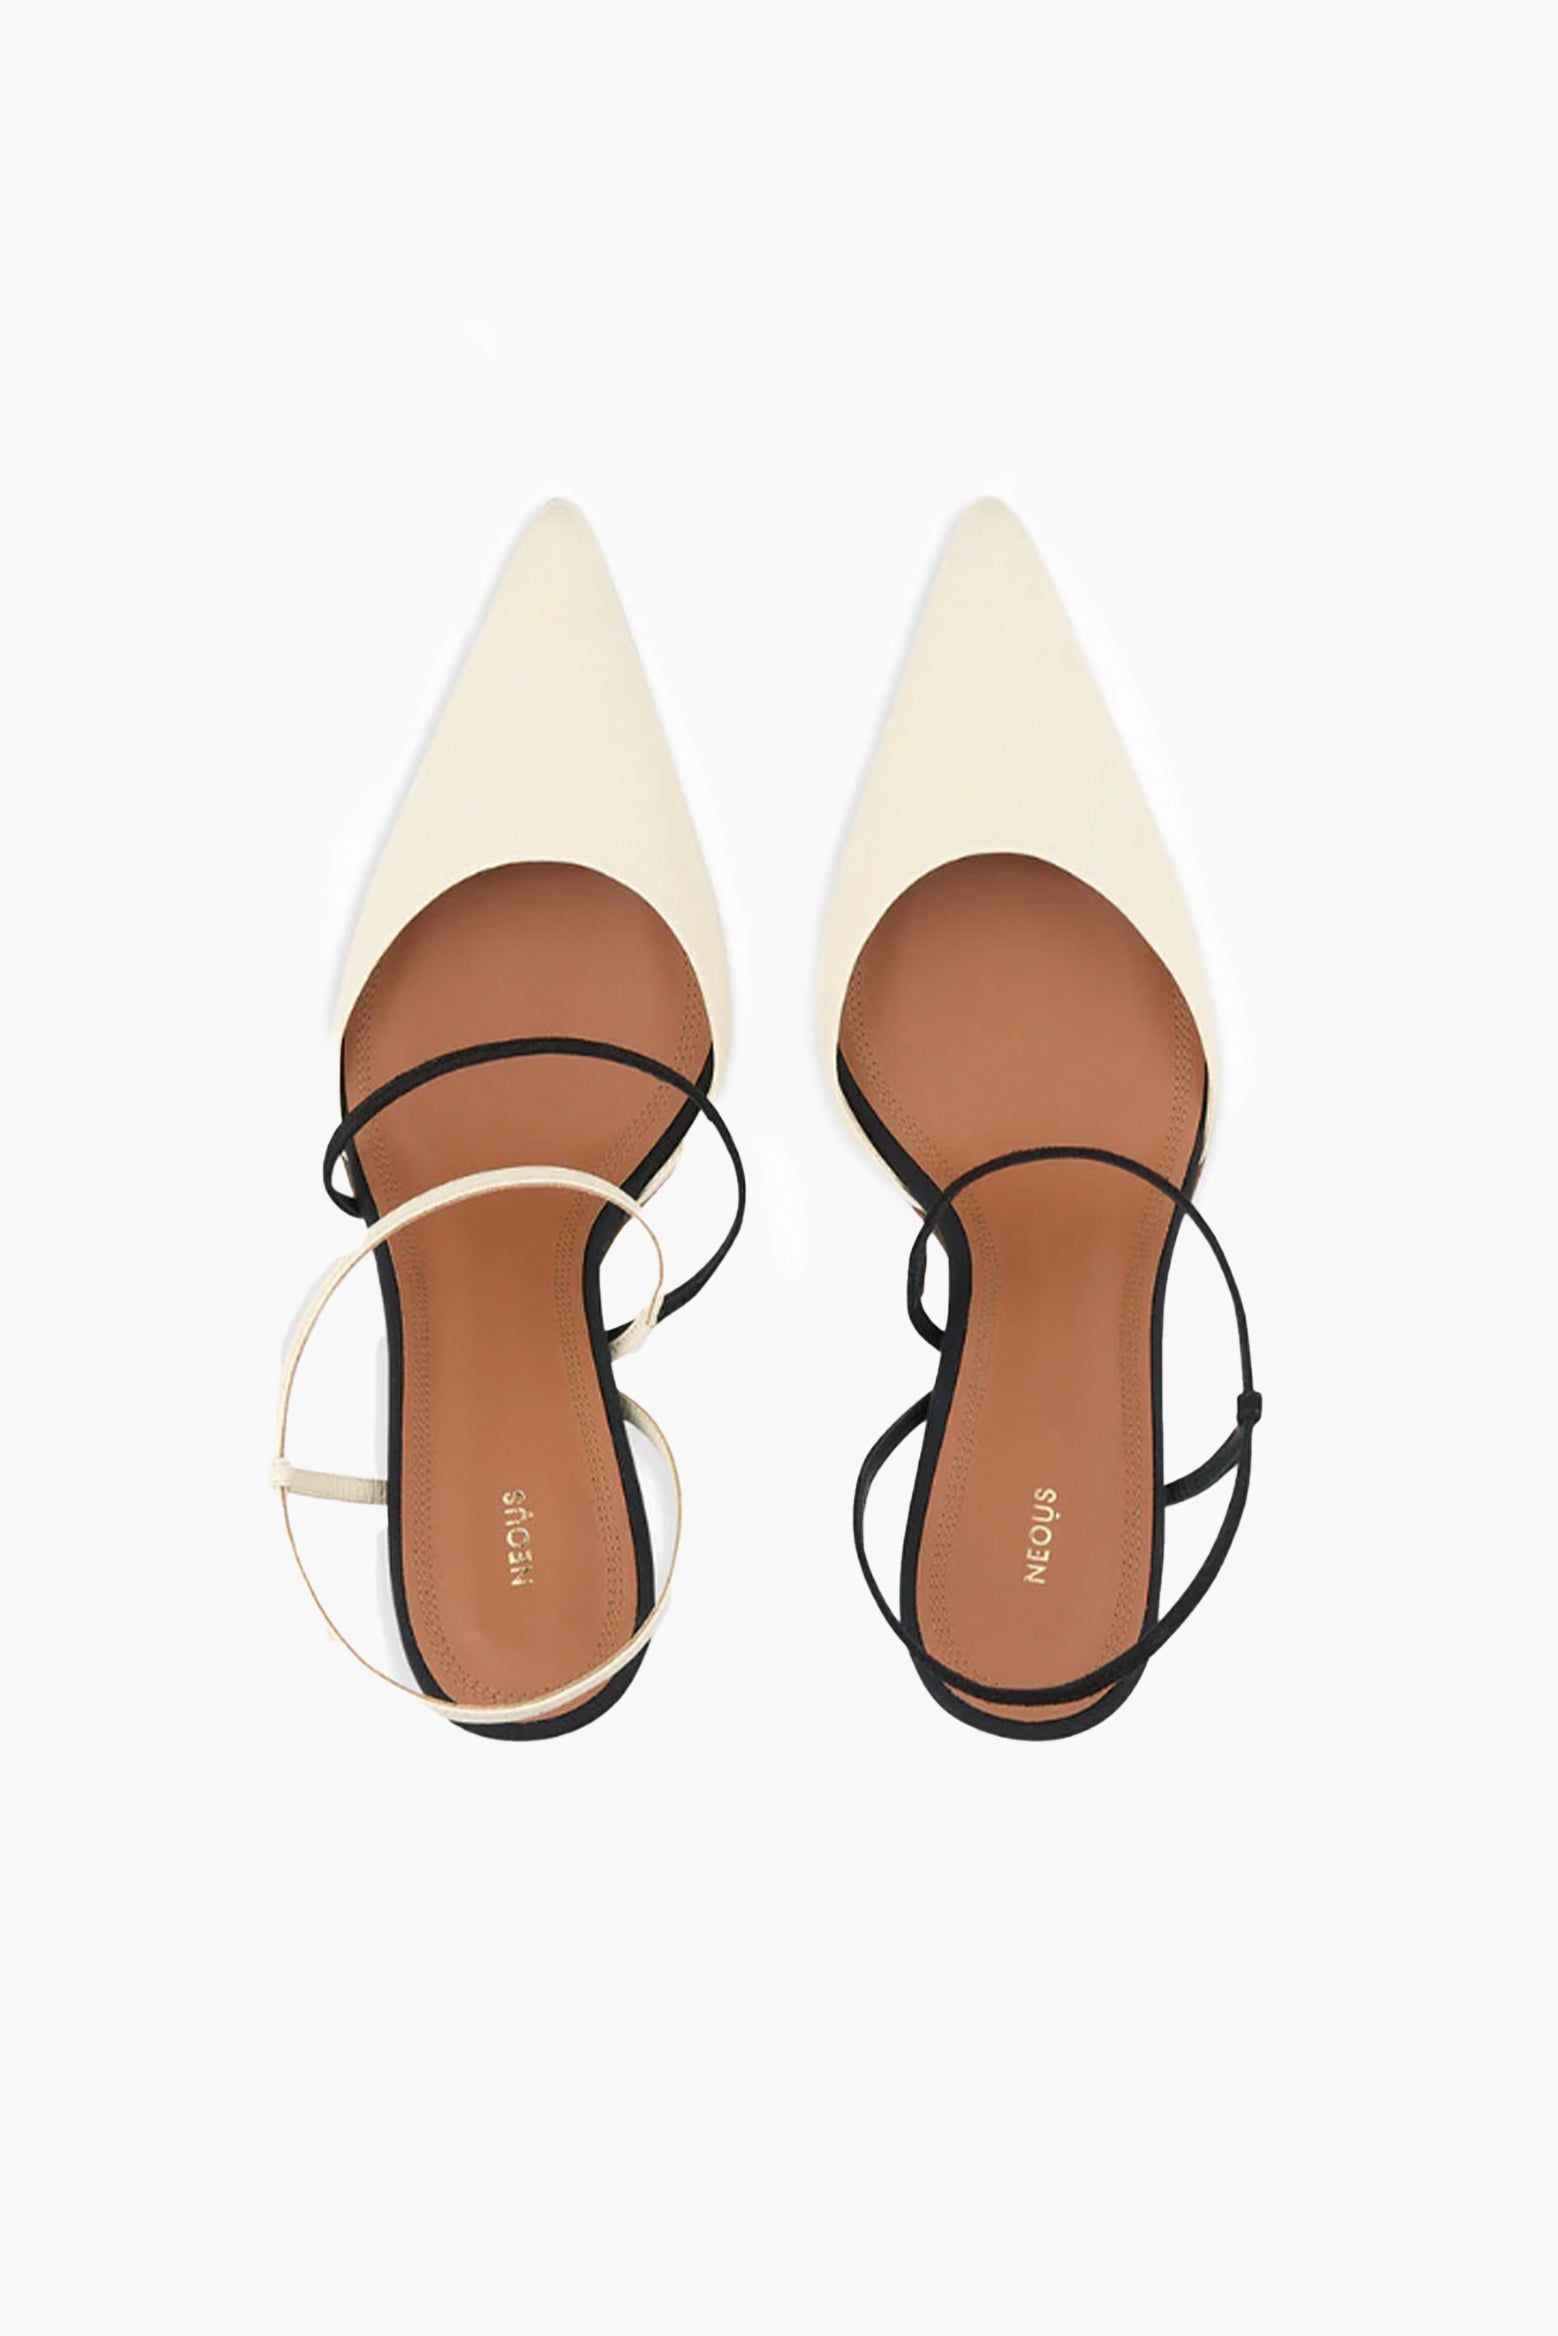 The Neous Tangra Leather Suede Slingback in Cream and Black available at The New Trend Australia